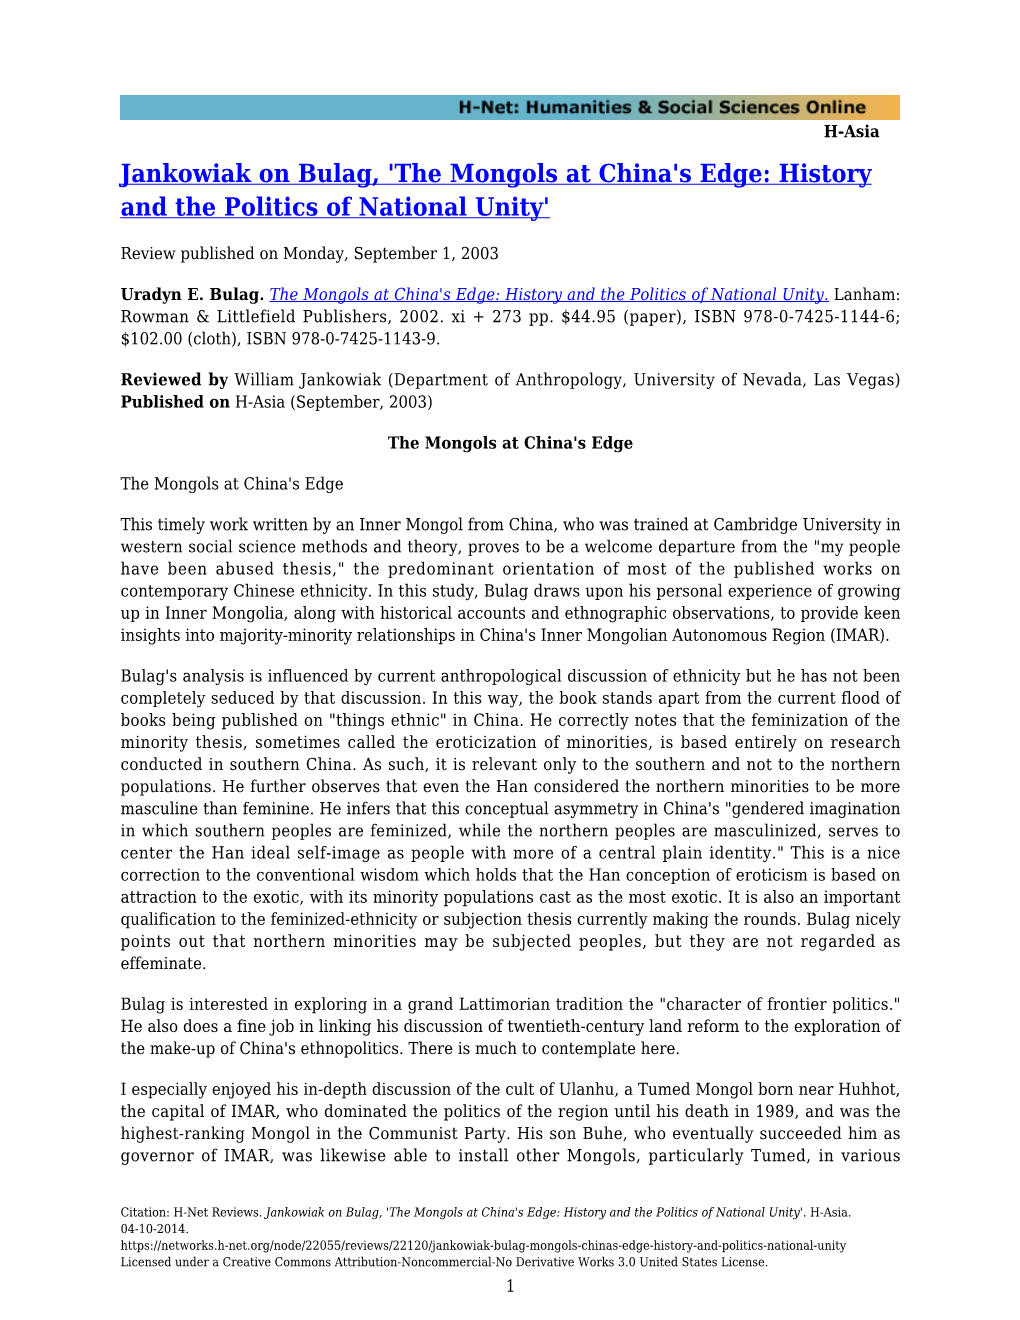 'The Mongols at China's Edge: History and the Politics of National Unity'